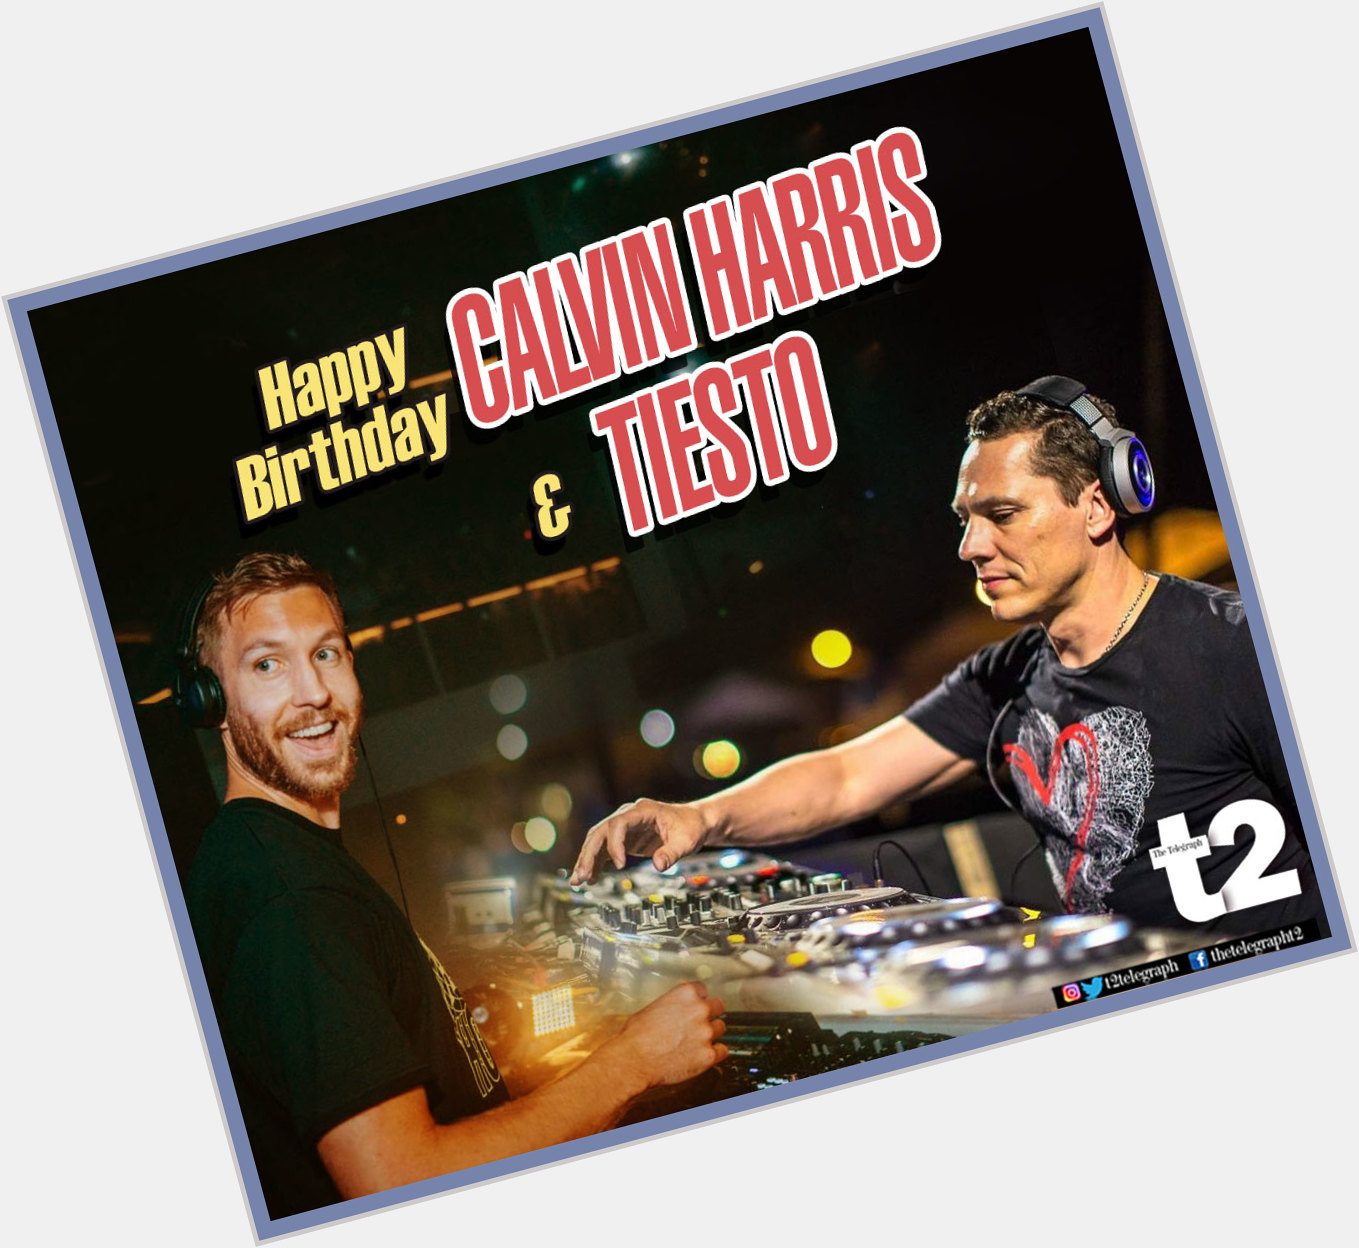 Happy birthday Calvin Harris and Tiesto, keep the thumping music play on and on.  